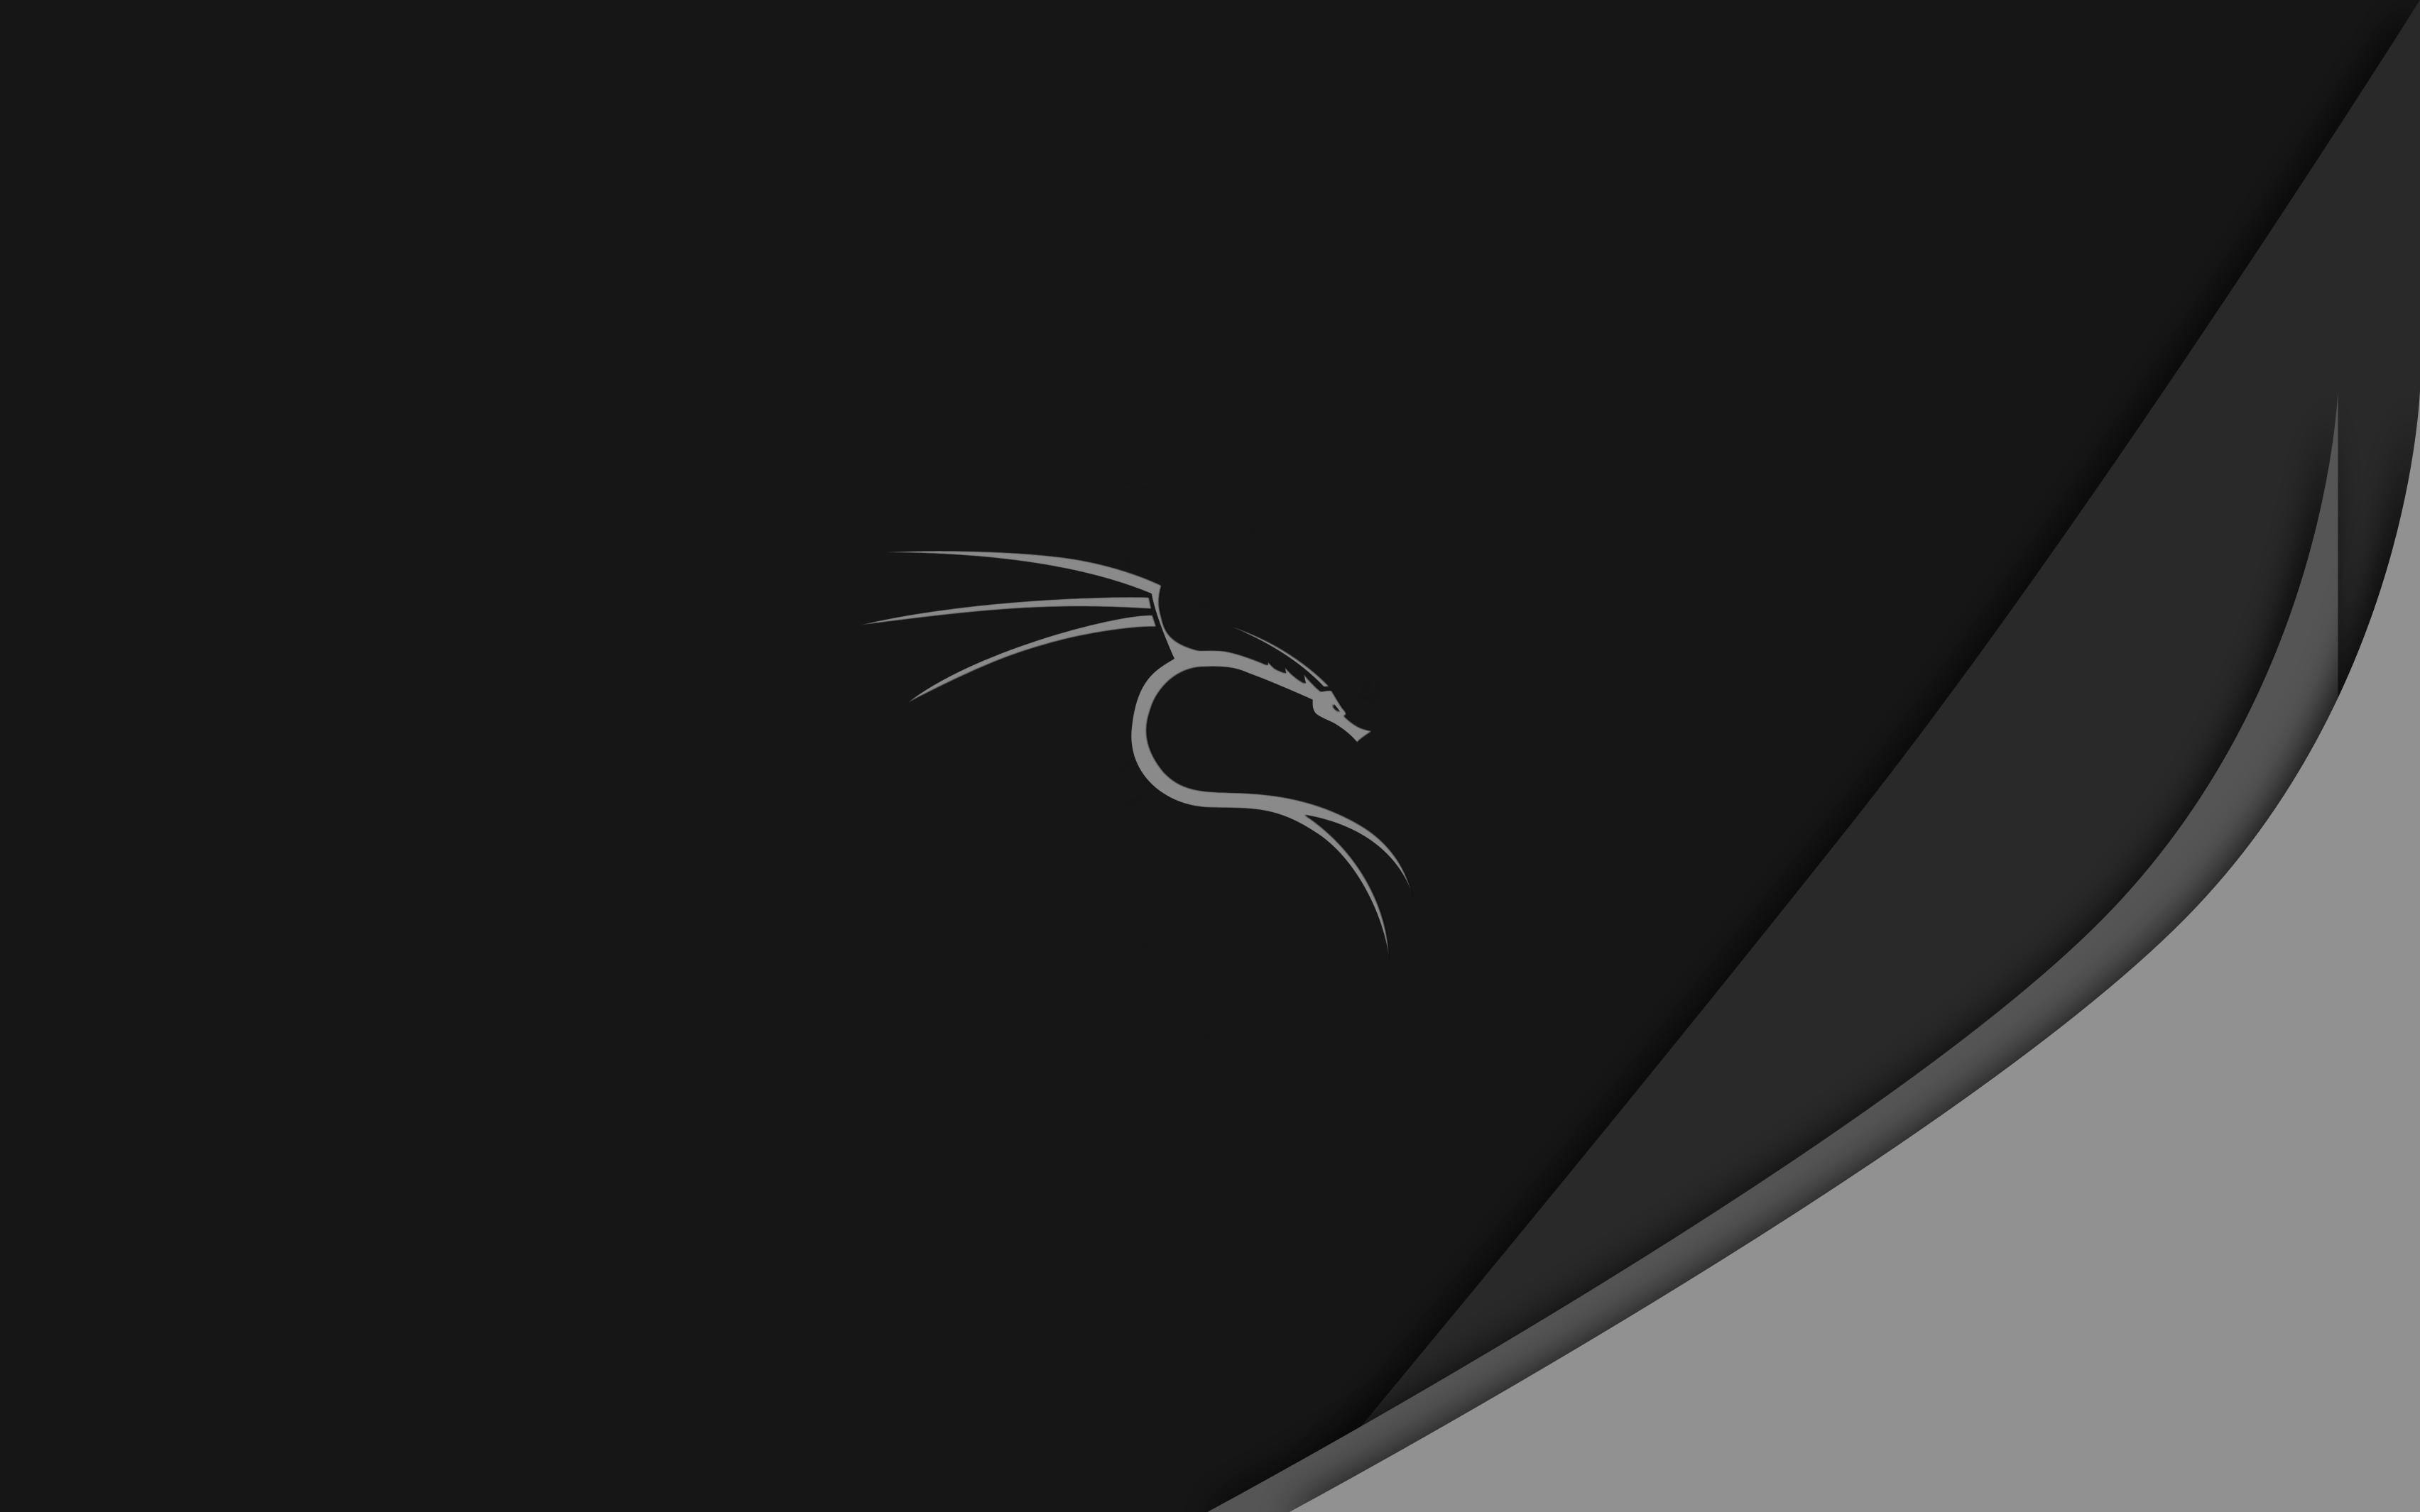 Kali Linux Wallpapers Top Free Kali Linux Backgrounds Wallpaperaccess